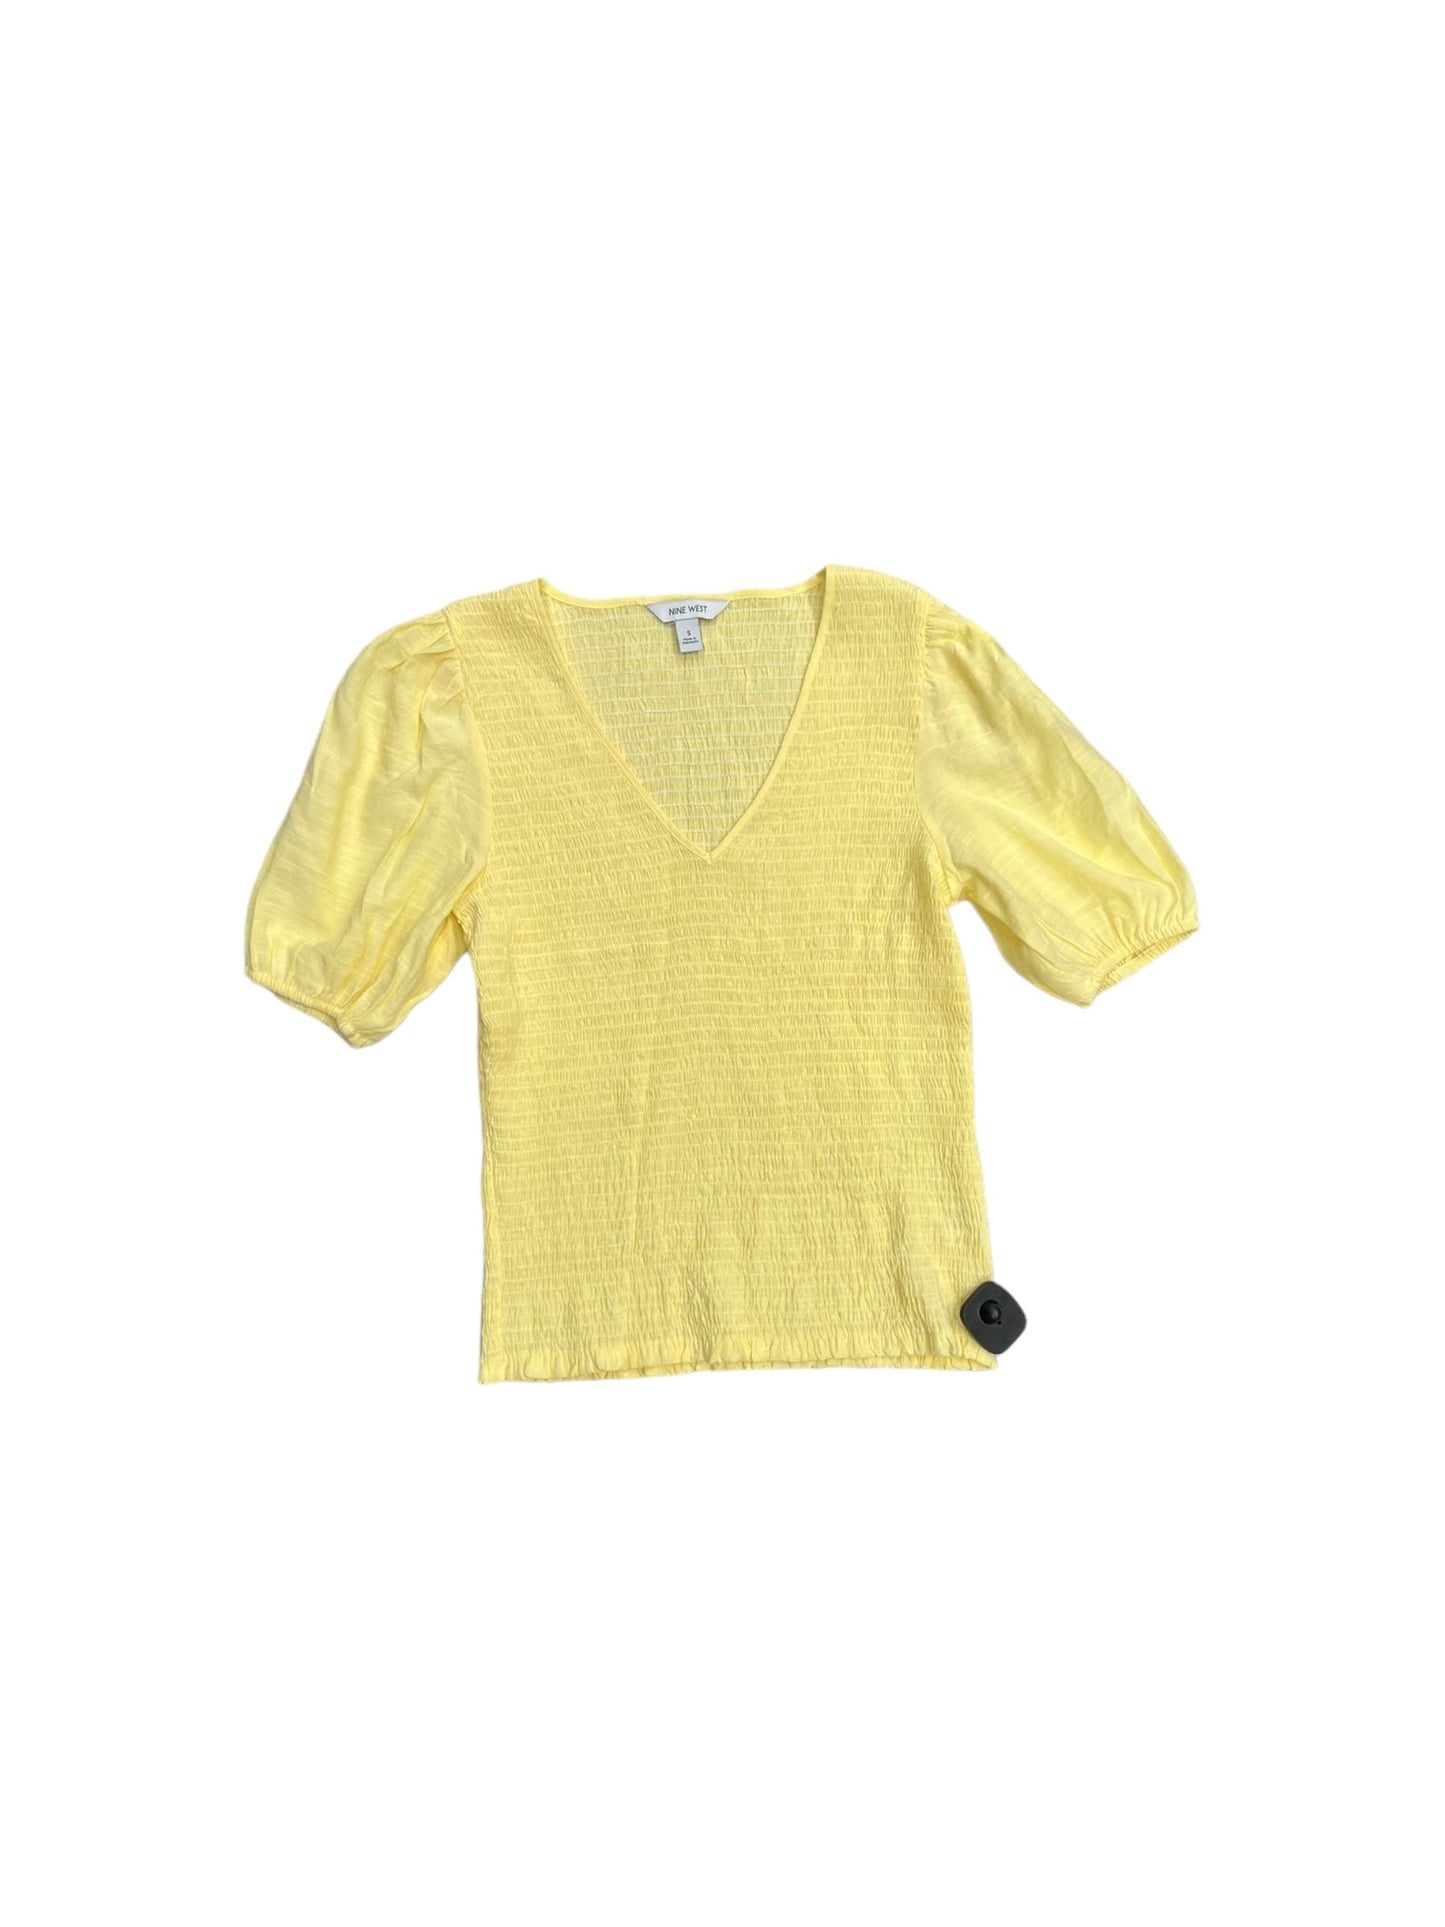 Yellow Top Short Sleeve Nine West, Size S